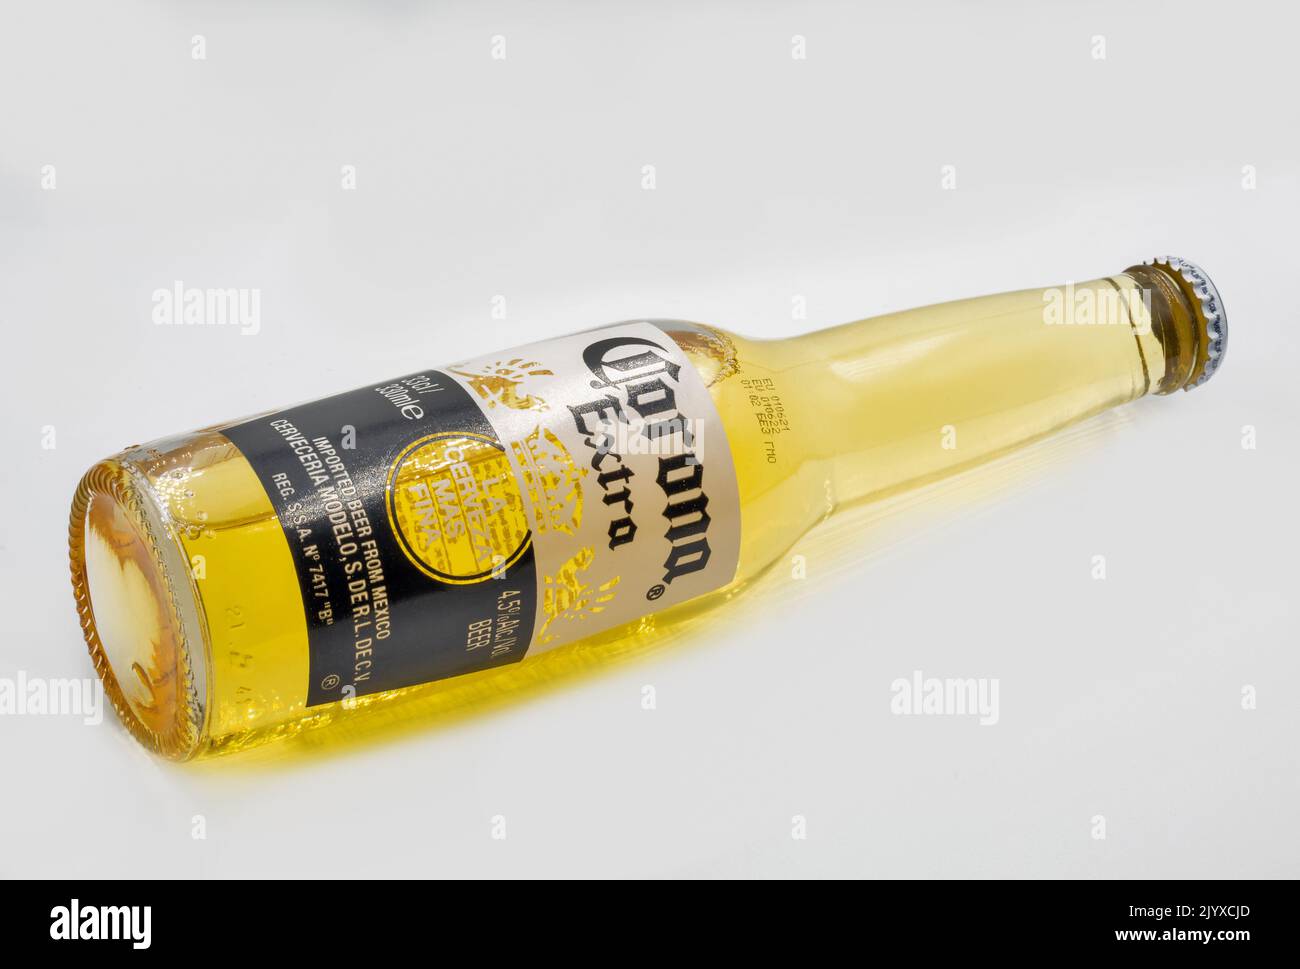 Kyiv, Ukraine - November 21, 2021: Studio shoot of Corona Extra beer bottle closeup on white. Corona Extra is produced in Mexico and exported to all o Stock Photo